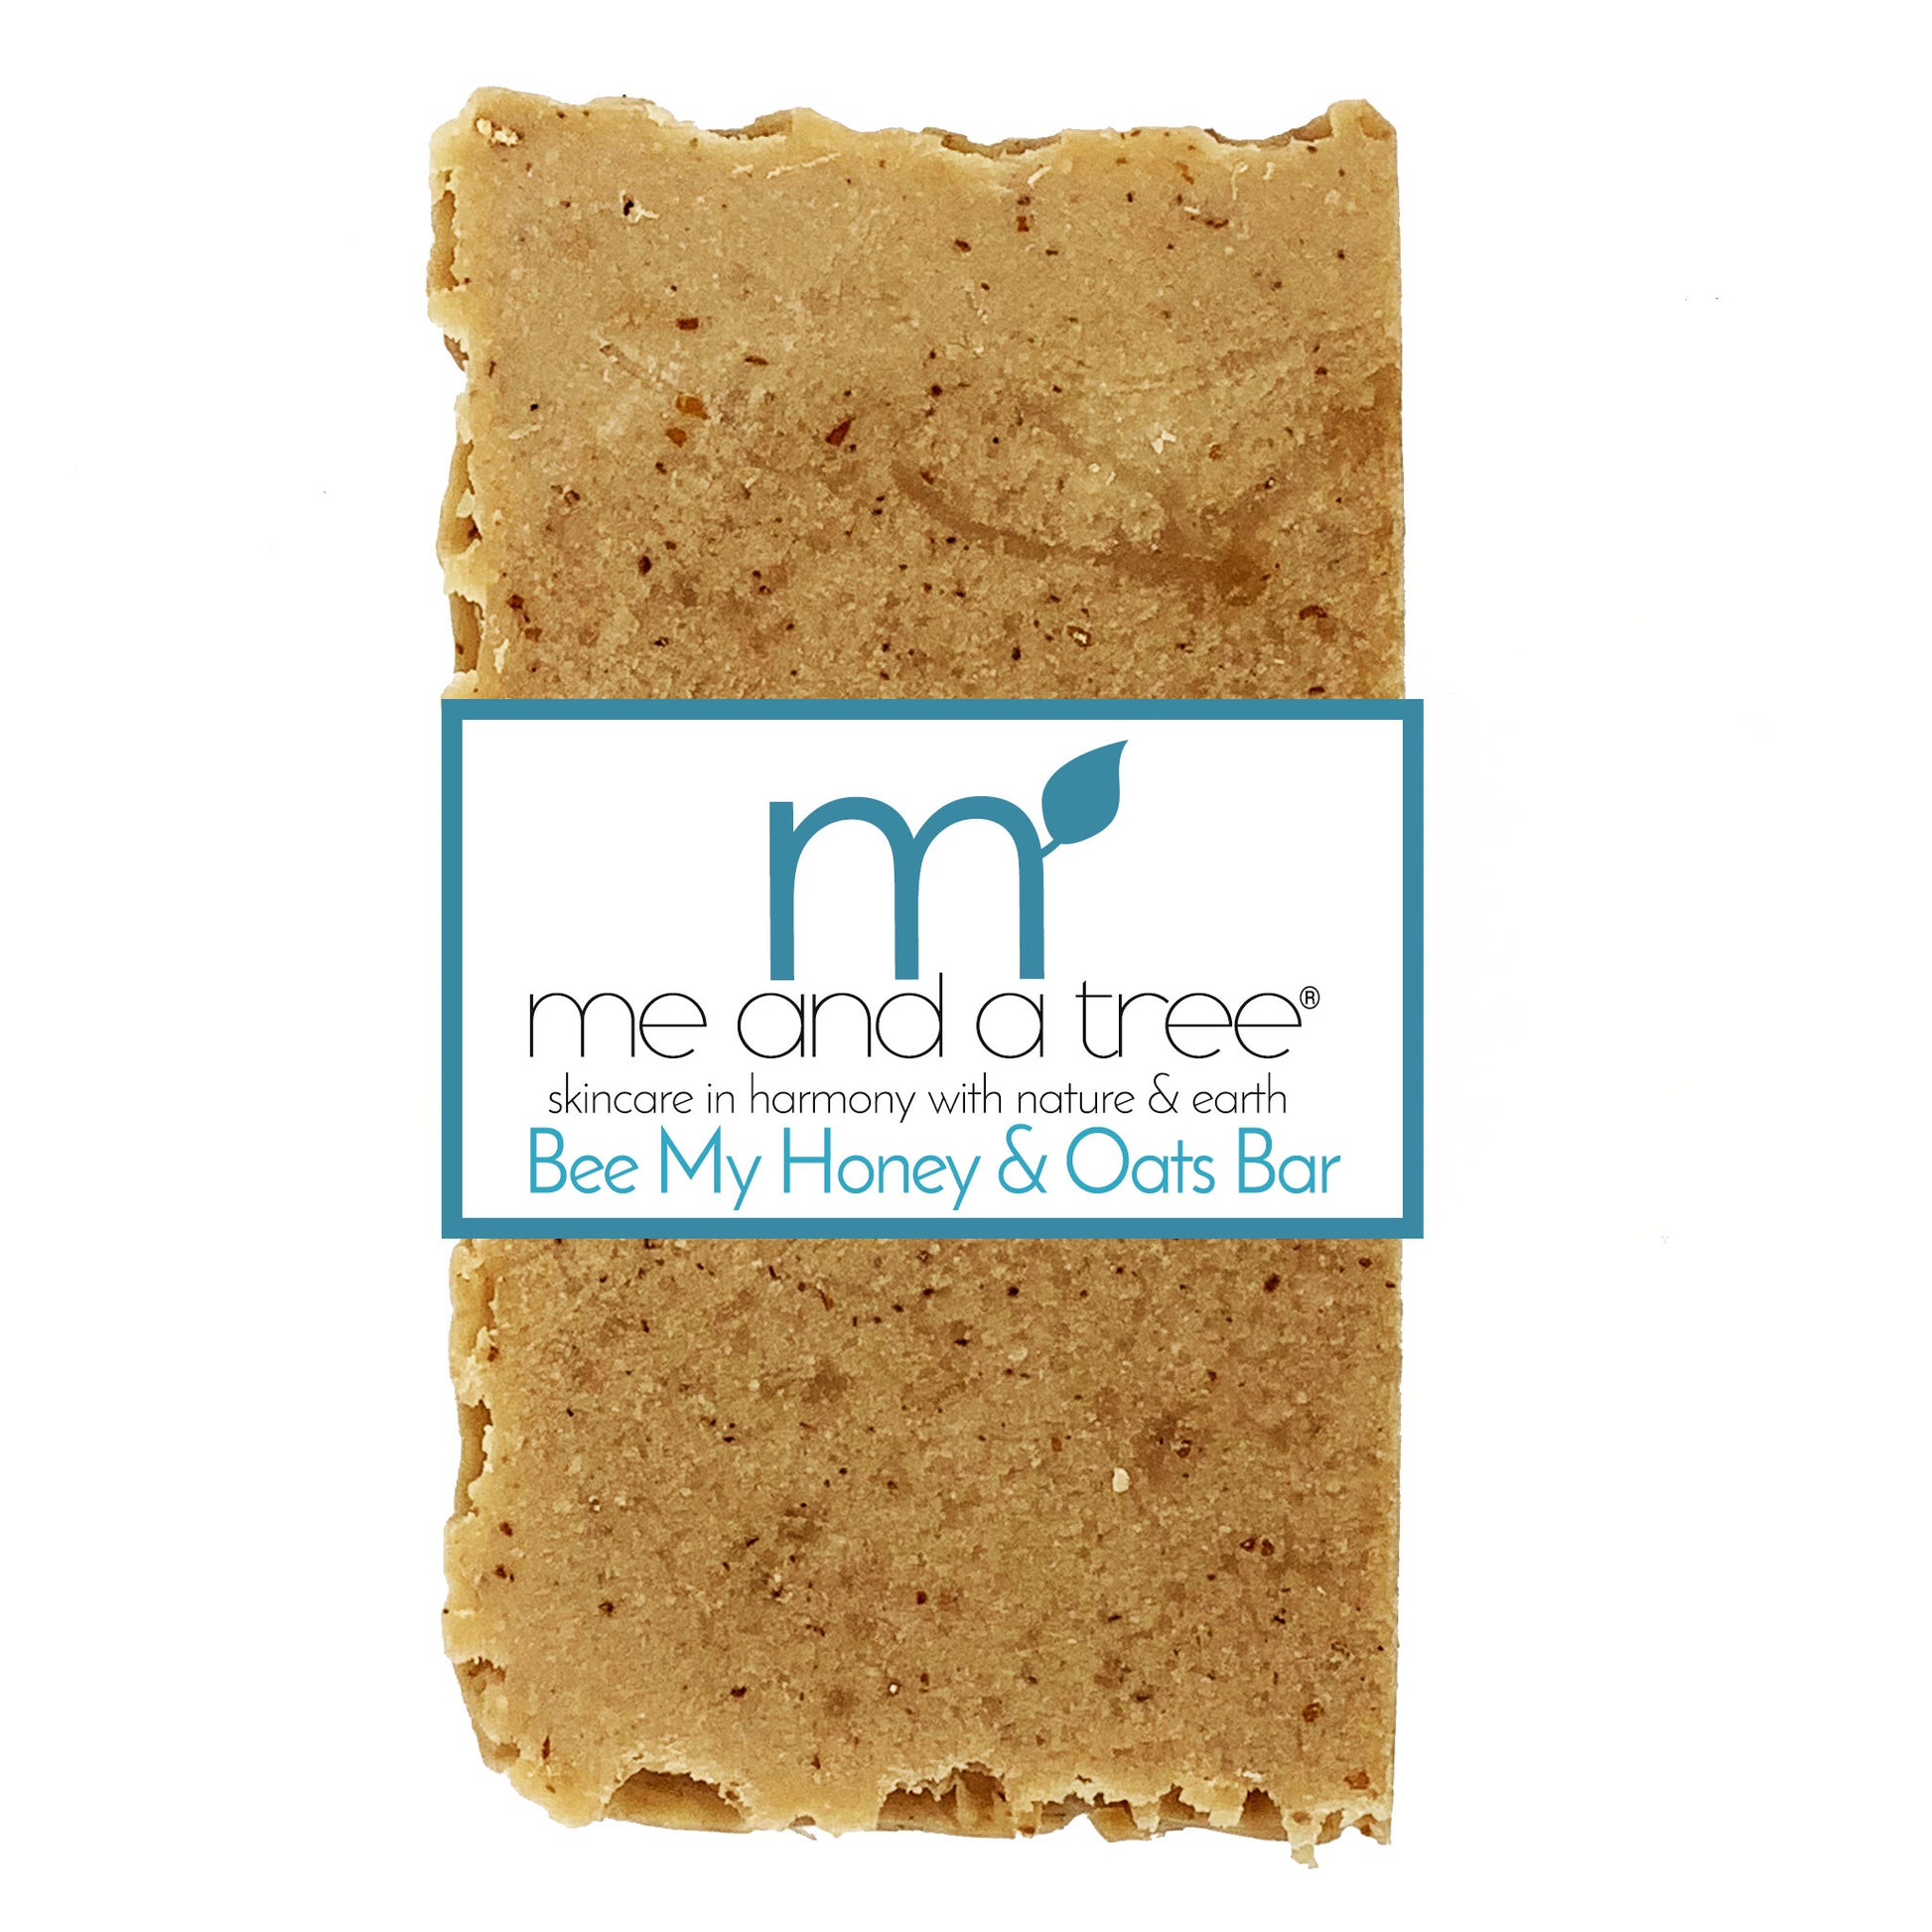 Bee My Honey & Oats Soap artisan handcrafted soap made with honey, oats, shea butter, and olive oil that offers a gentle, moisturizing, and exfoliating cleanse for all ages and skin types.